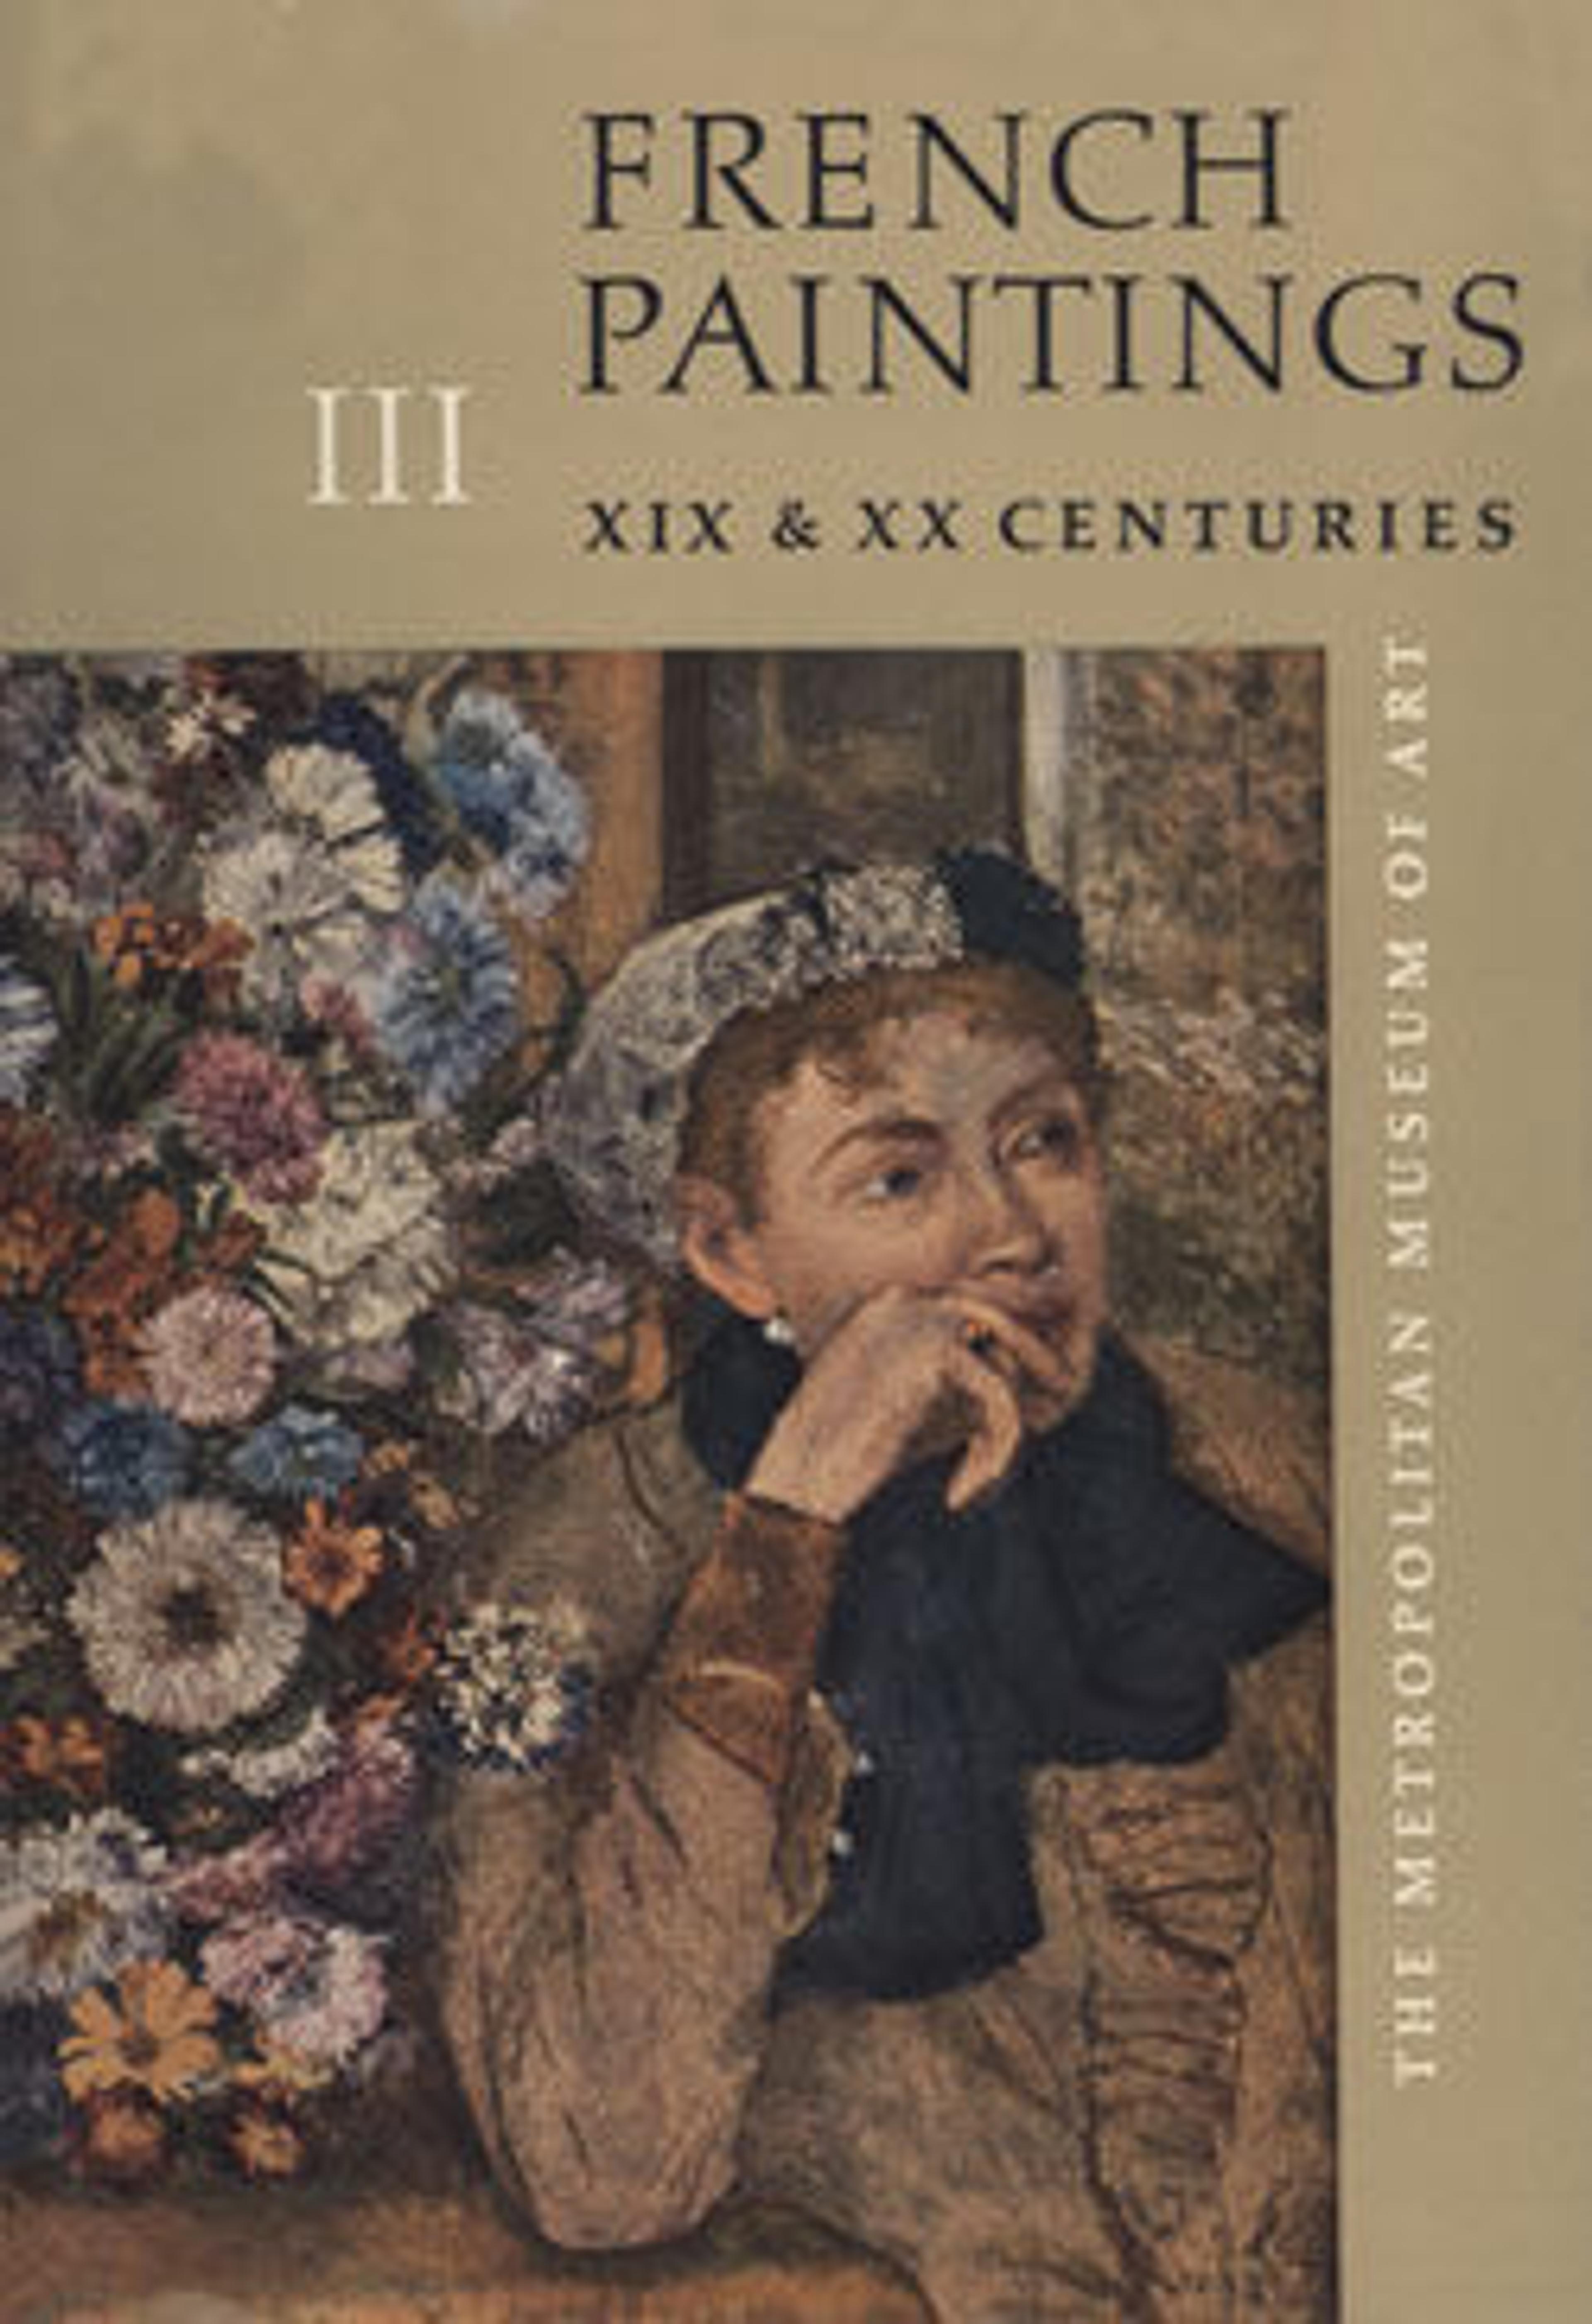 French Paintings: A Catalogue of the Collection of The Metropolitan Museum of Art. Vol. 3, Nineteenth and Twentieth Centuries